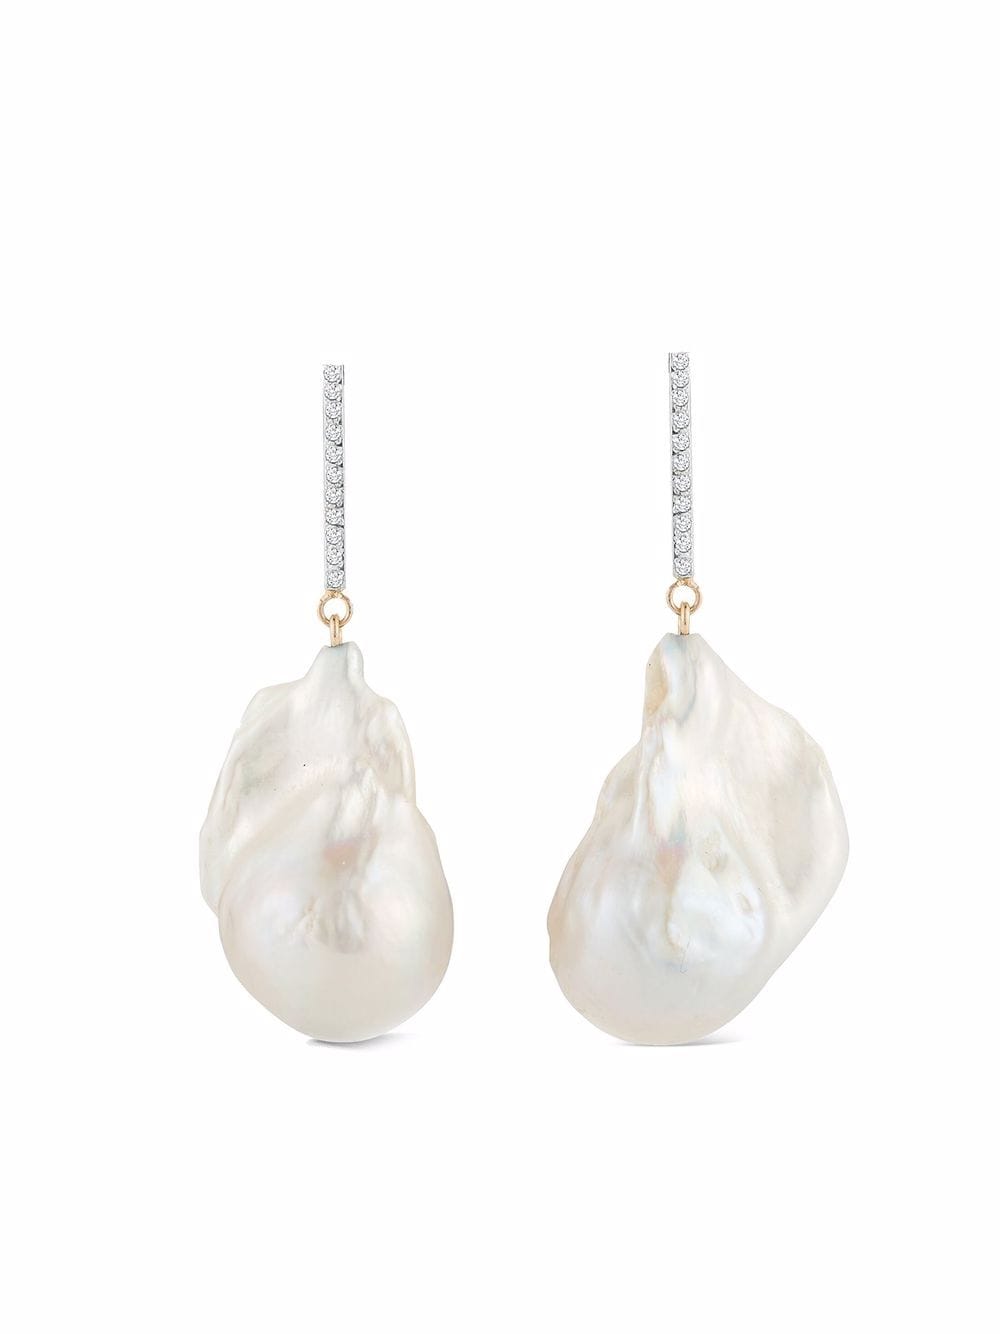 Mateo + Mateo 14kt yellow gold One-of-a-kind baroque pearl and diamond ...